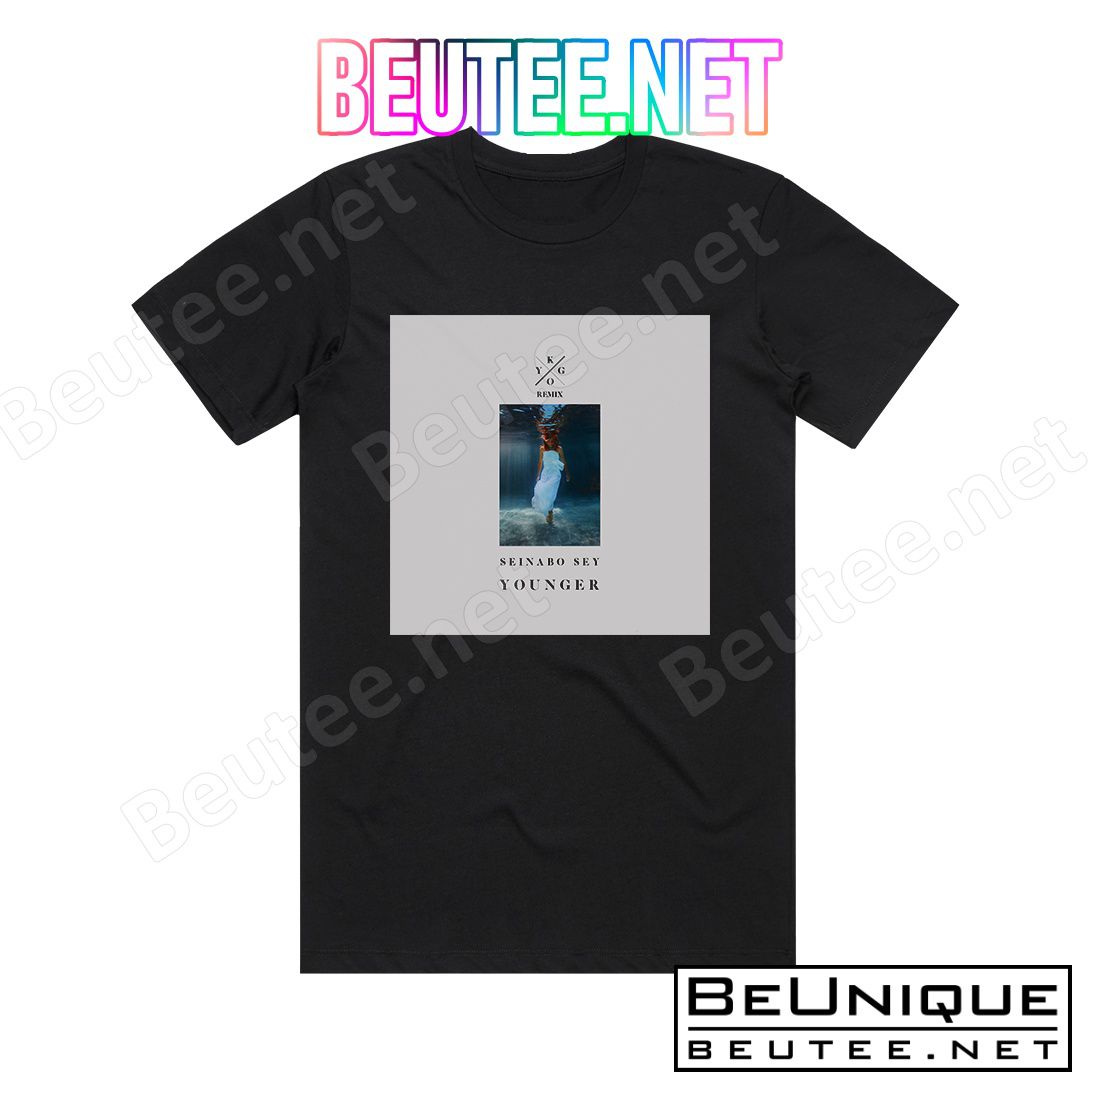 Seinabo Sey Younger 1 Album Cover T-Shirt